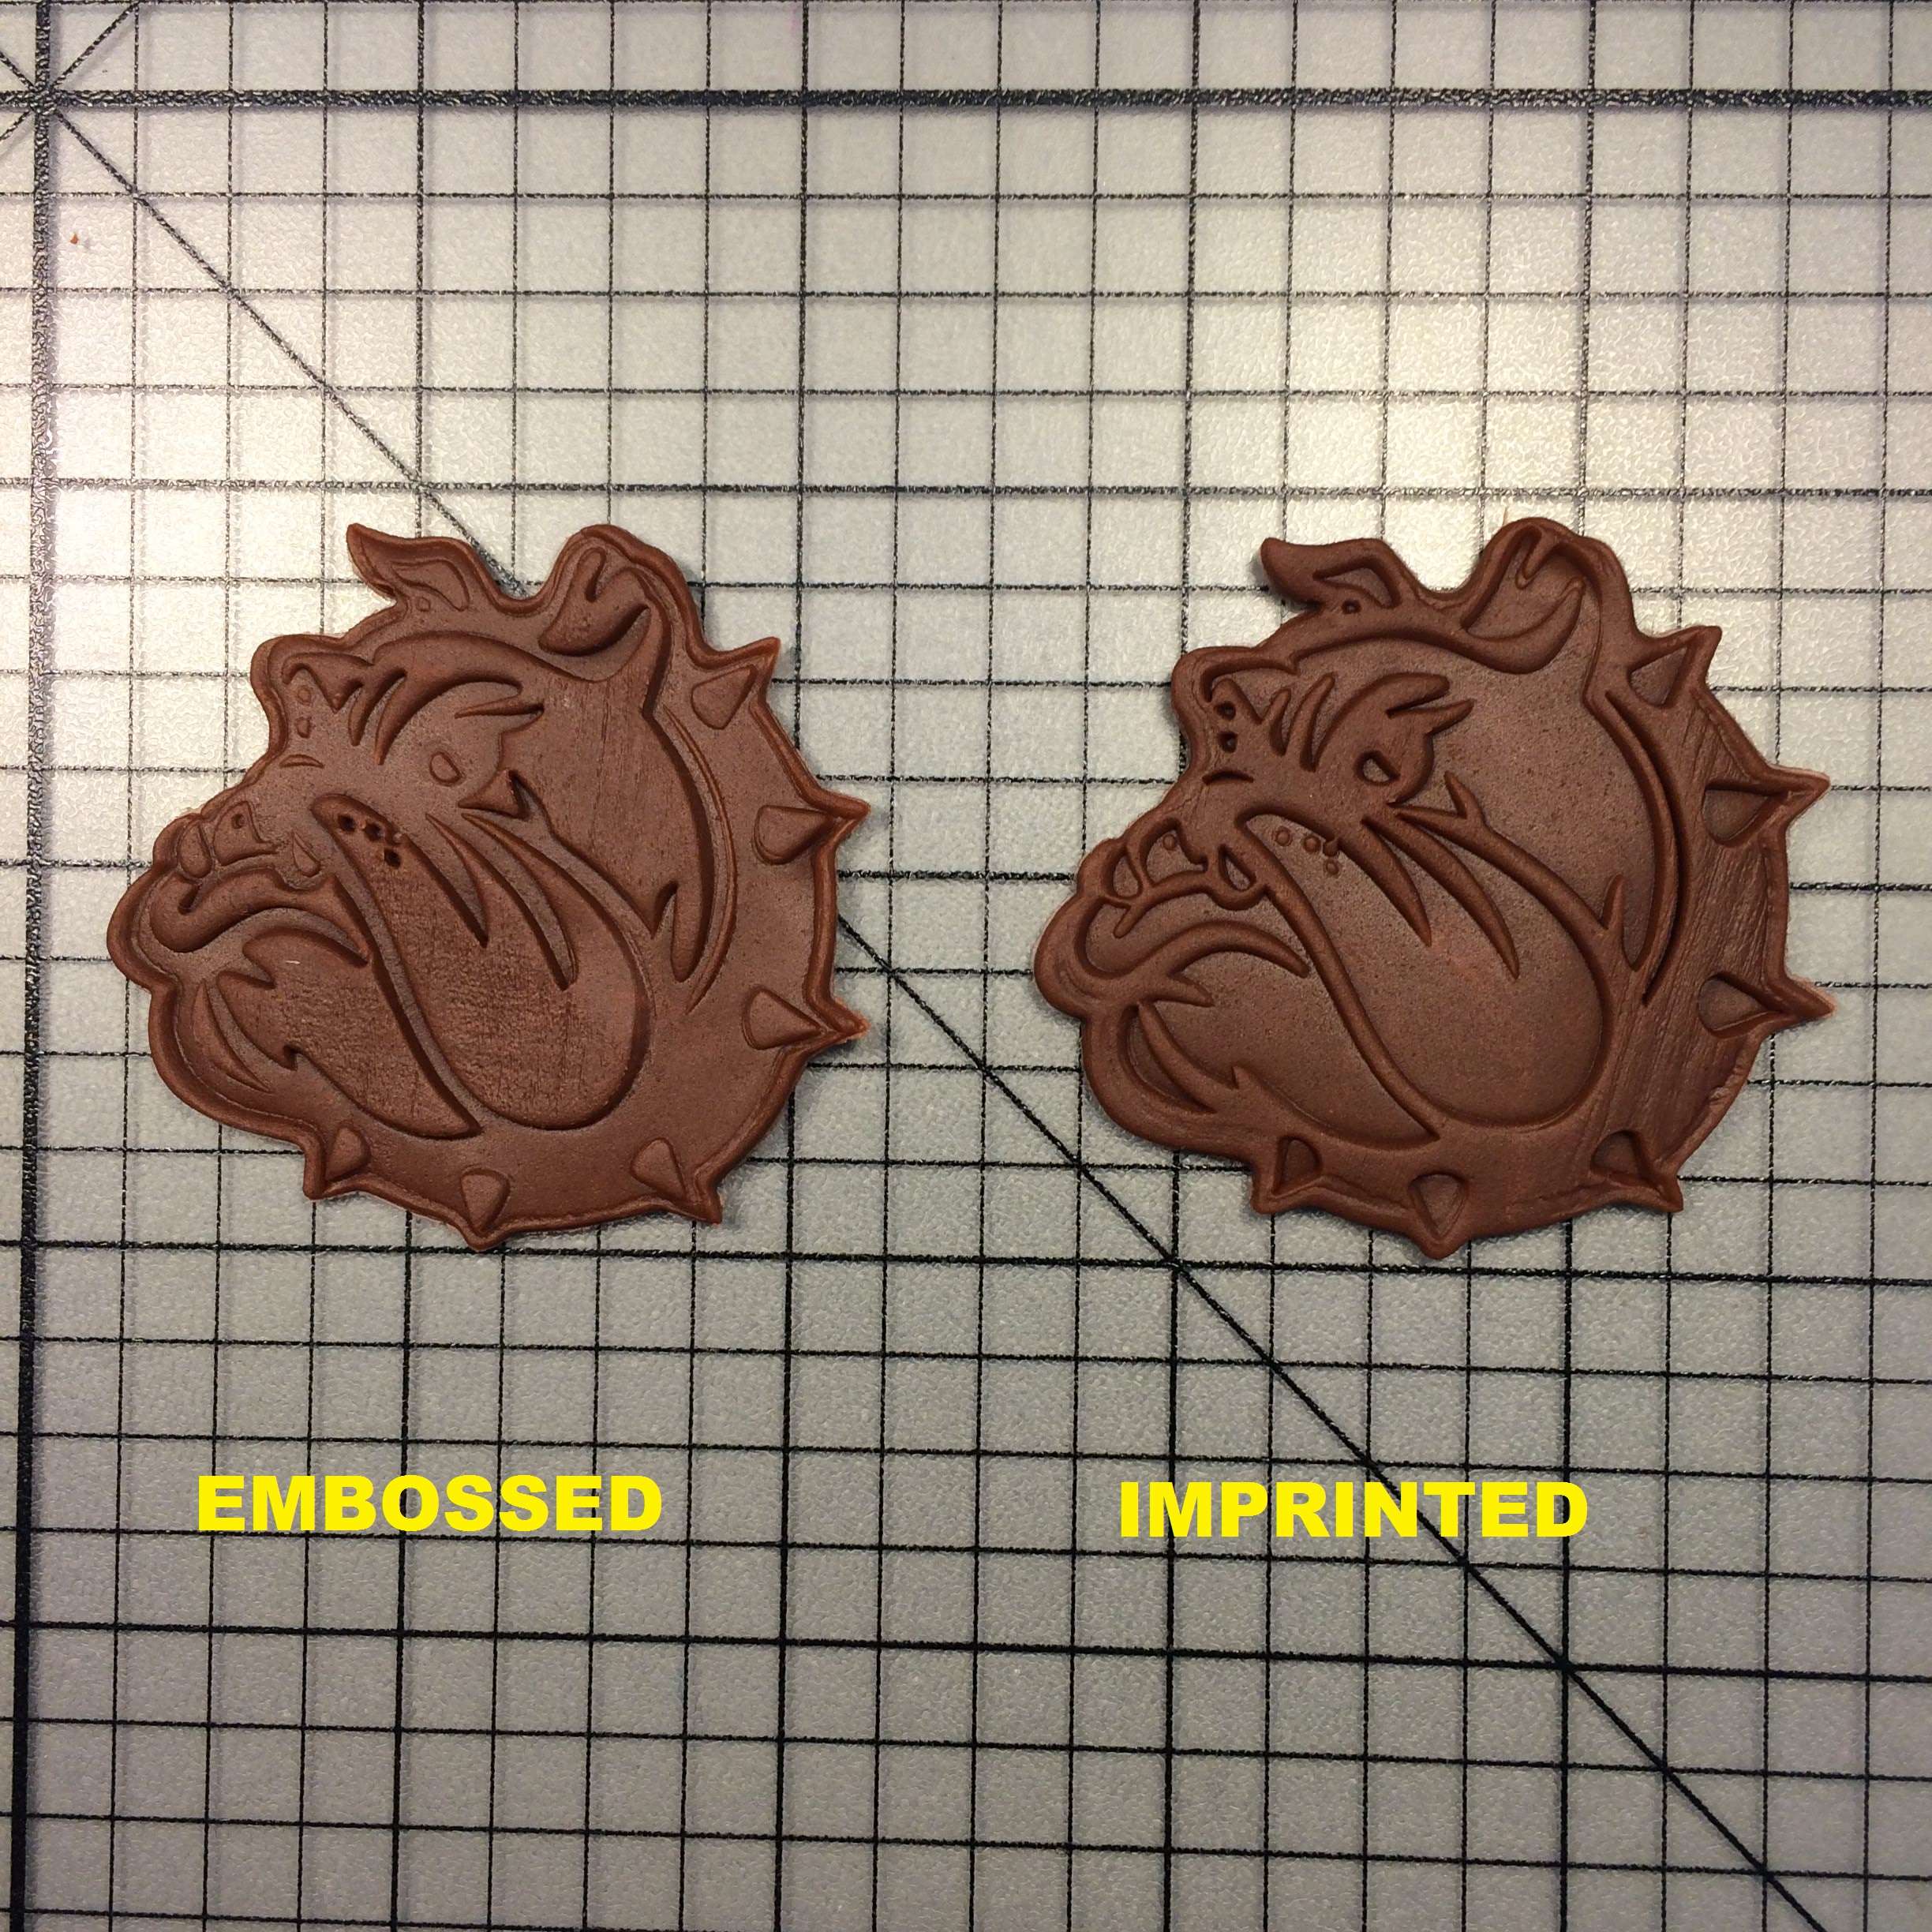 Marine Corps Bulldog Shaped Fondant Cookie Cutter and Stamp #1155 